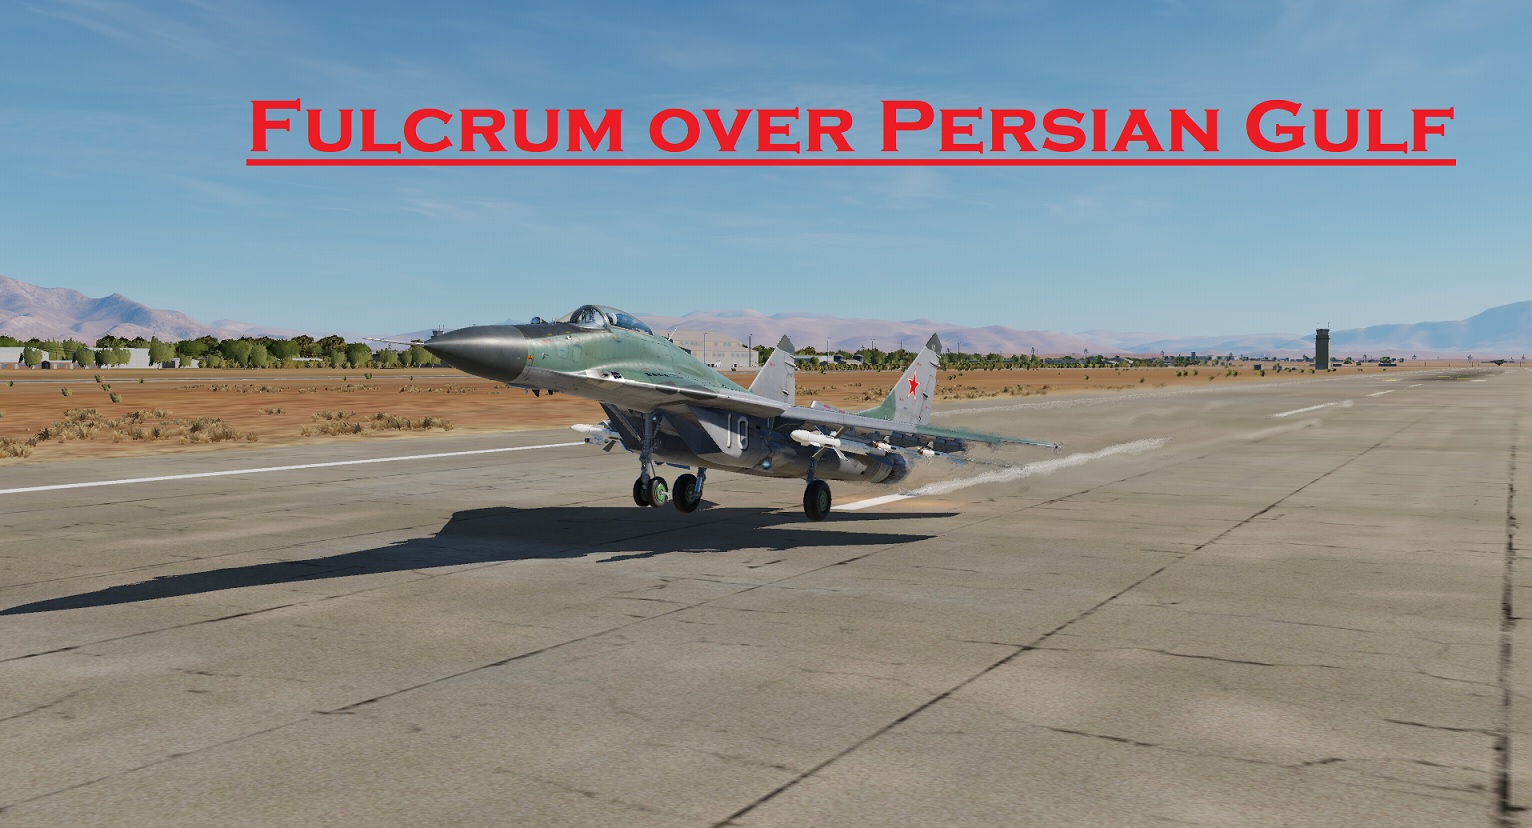  Fulcrum over Persian Gulf using Mbot Dynamic Campaign Engine